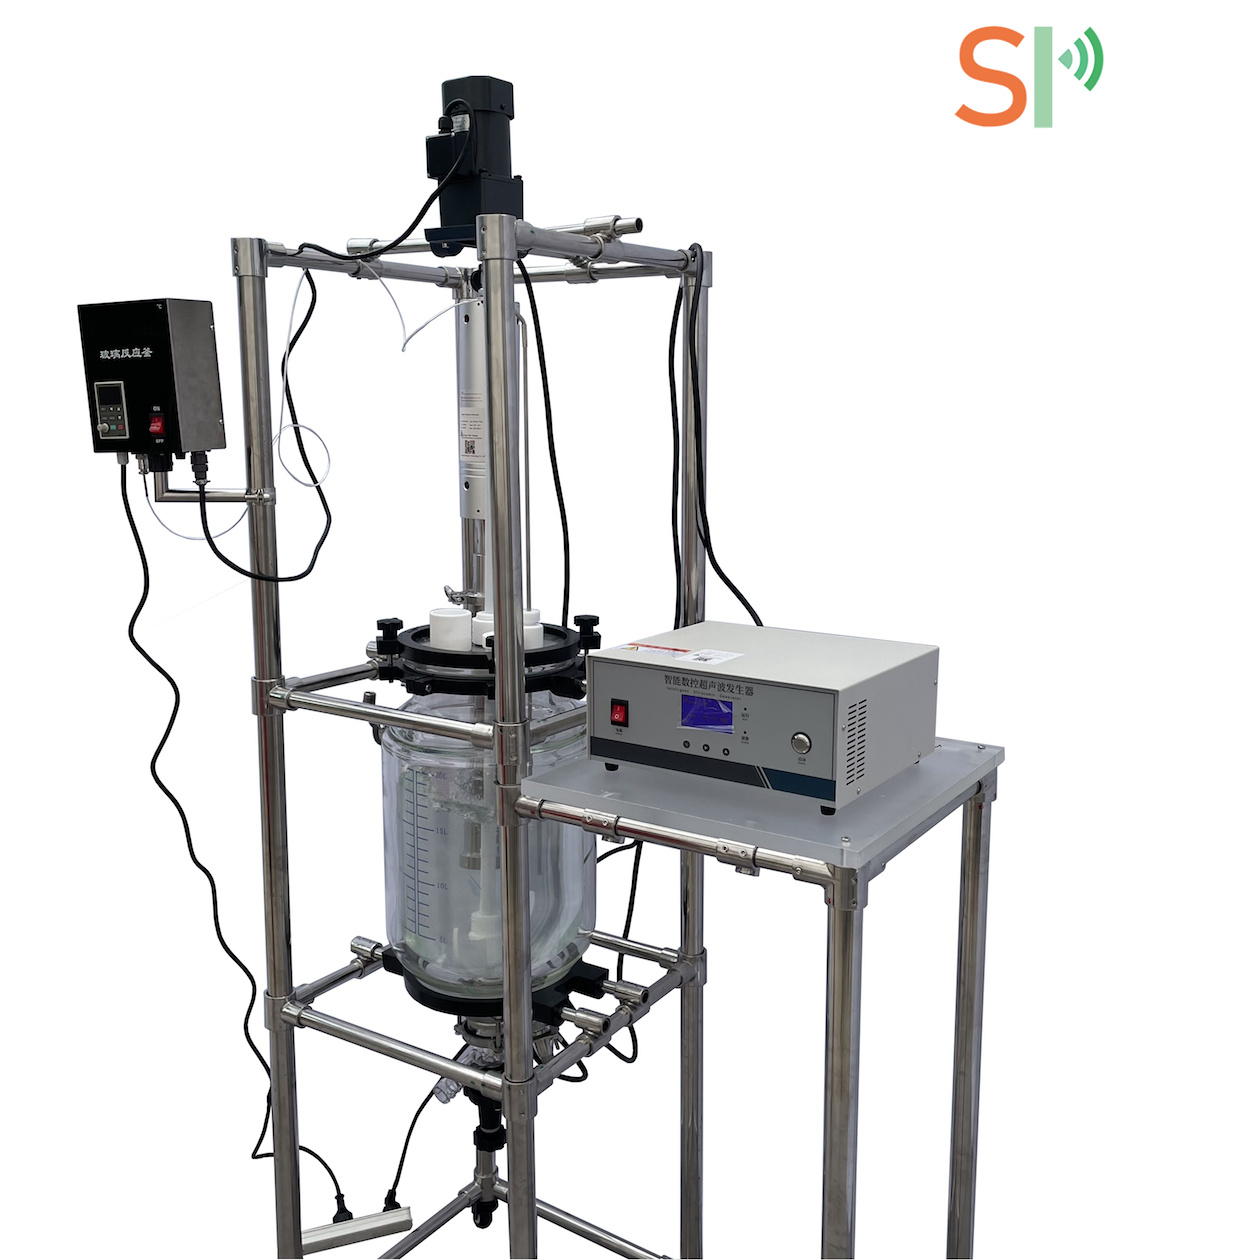 Industrial-Grade Ultrasonic Emulsification System for High-Frequency Processing of Vegetable Oil in Pure Water